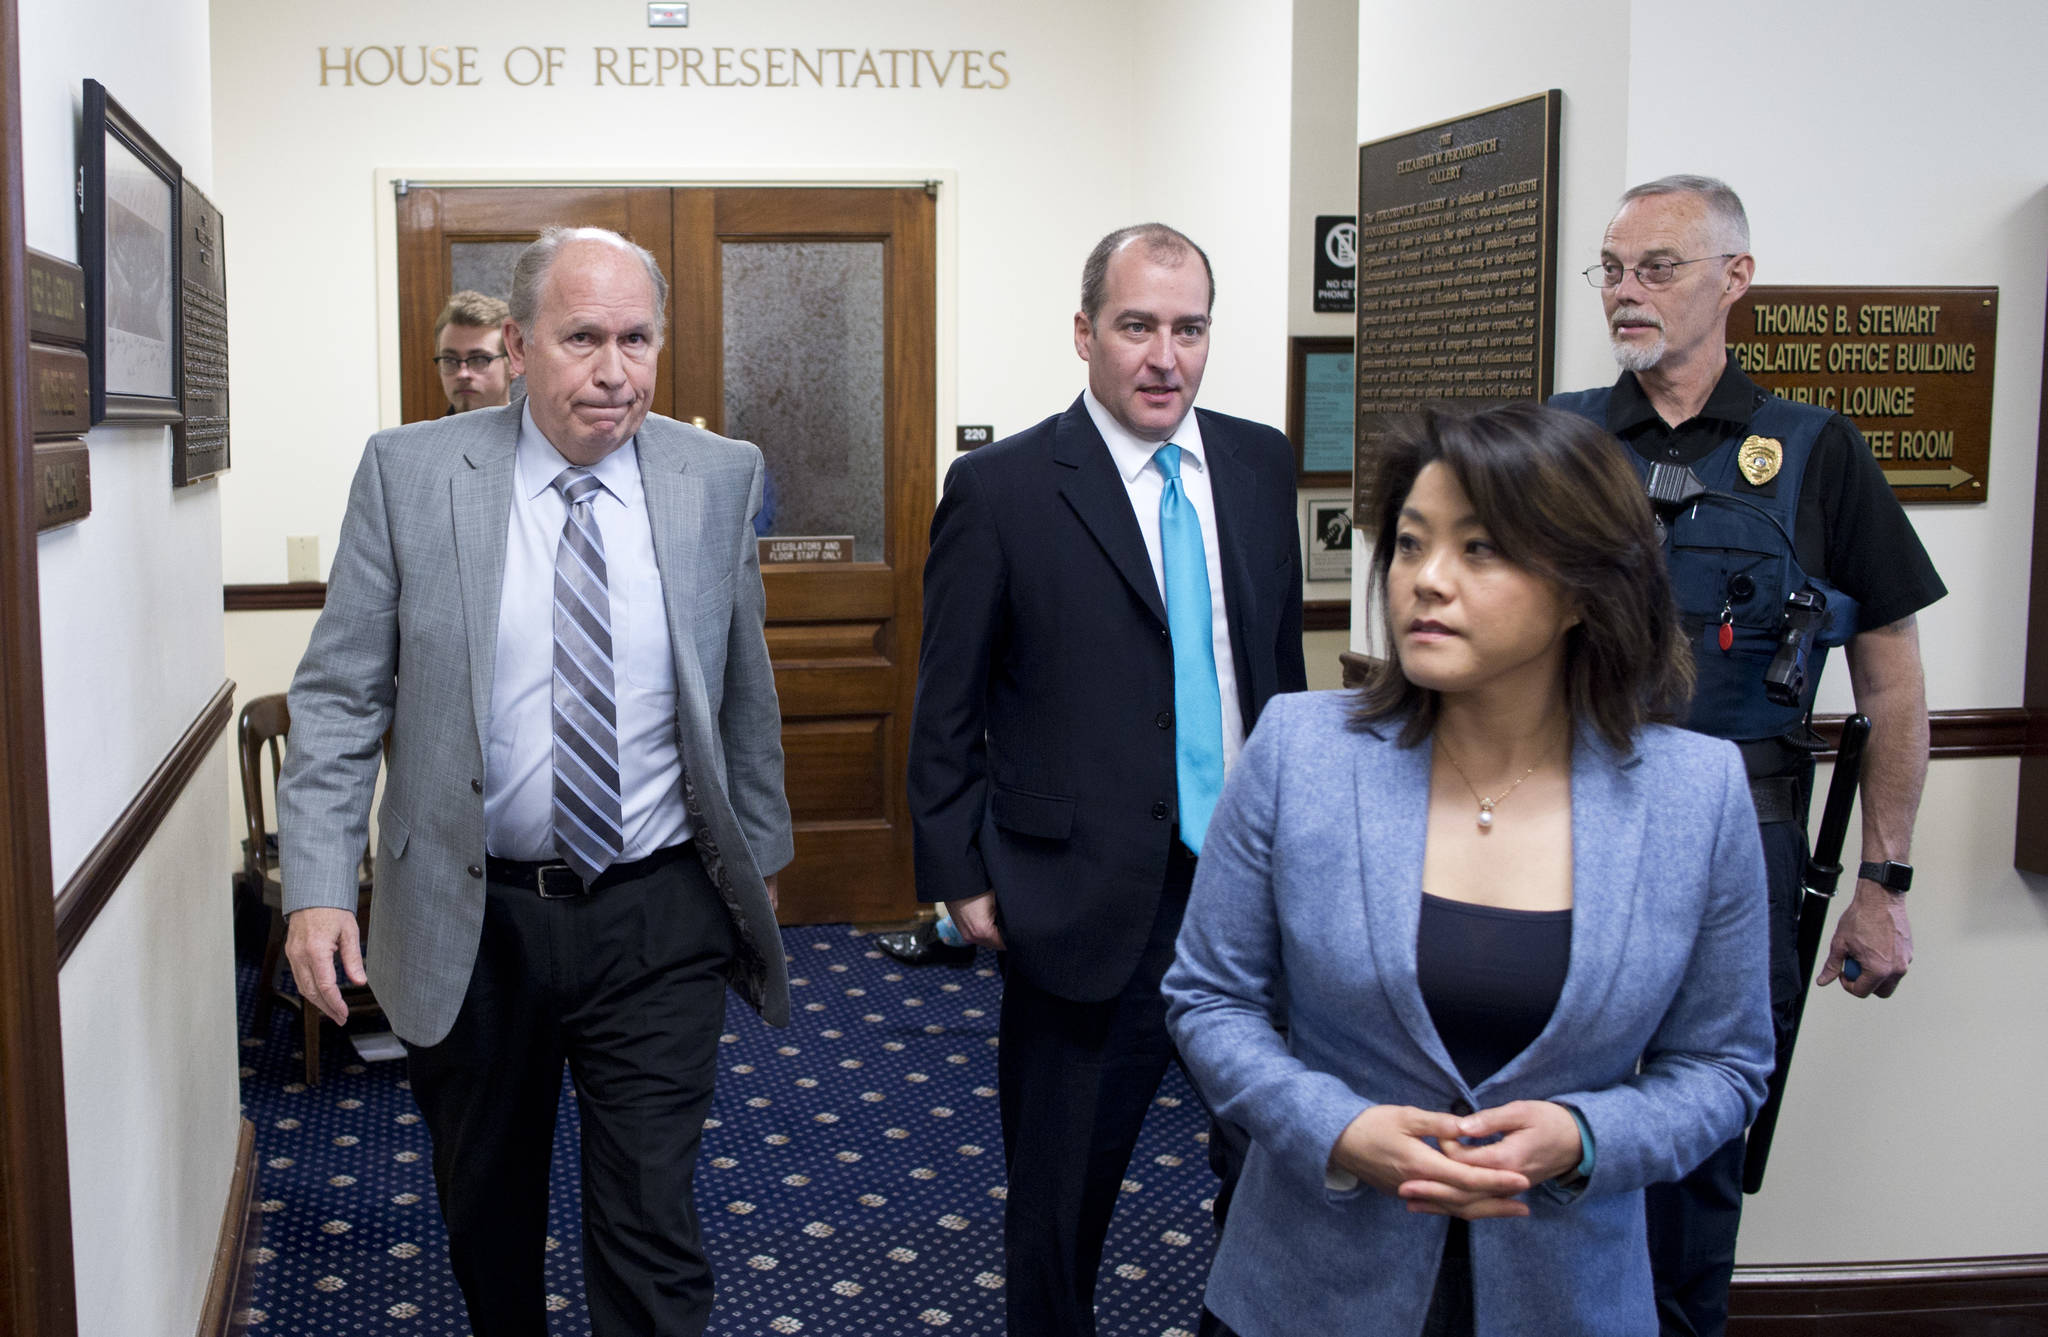 Gov. Bill Walker leaves the gallery of the Alaska House of Representatives with his legislative liaison Darwin Peterson, center, and Communication Director Grace Jang after watching the House passed their version of Senate Bill 26 on Wednesday, April 12, 2017. The bill would draw from the earnings of the Alaska Permanent Fund to address Alaska’s $2.7 billion funding gap, and cap the Permanent Fund Dividend at $1,250 for the next two years. (Michael Penn | Juneau Empire)